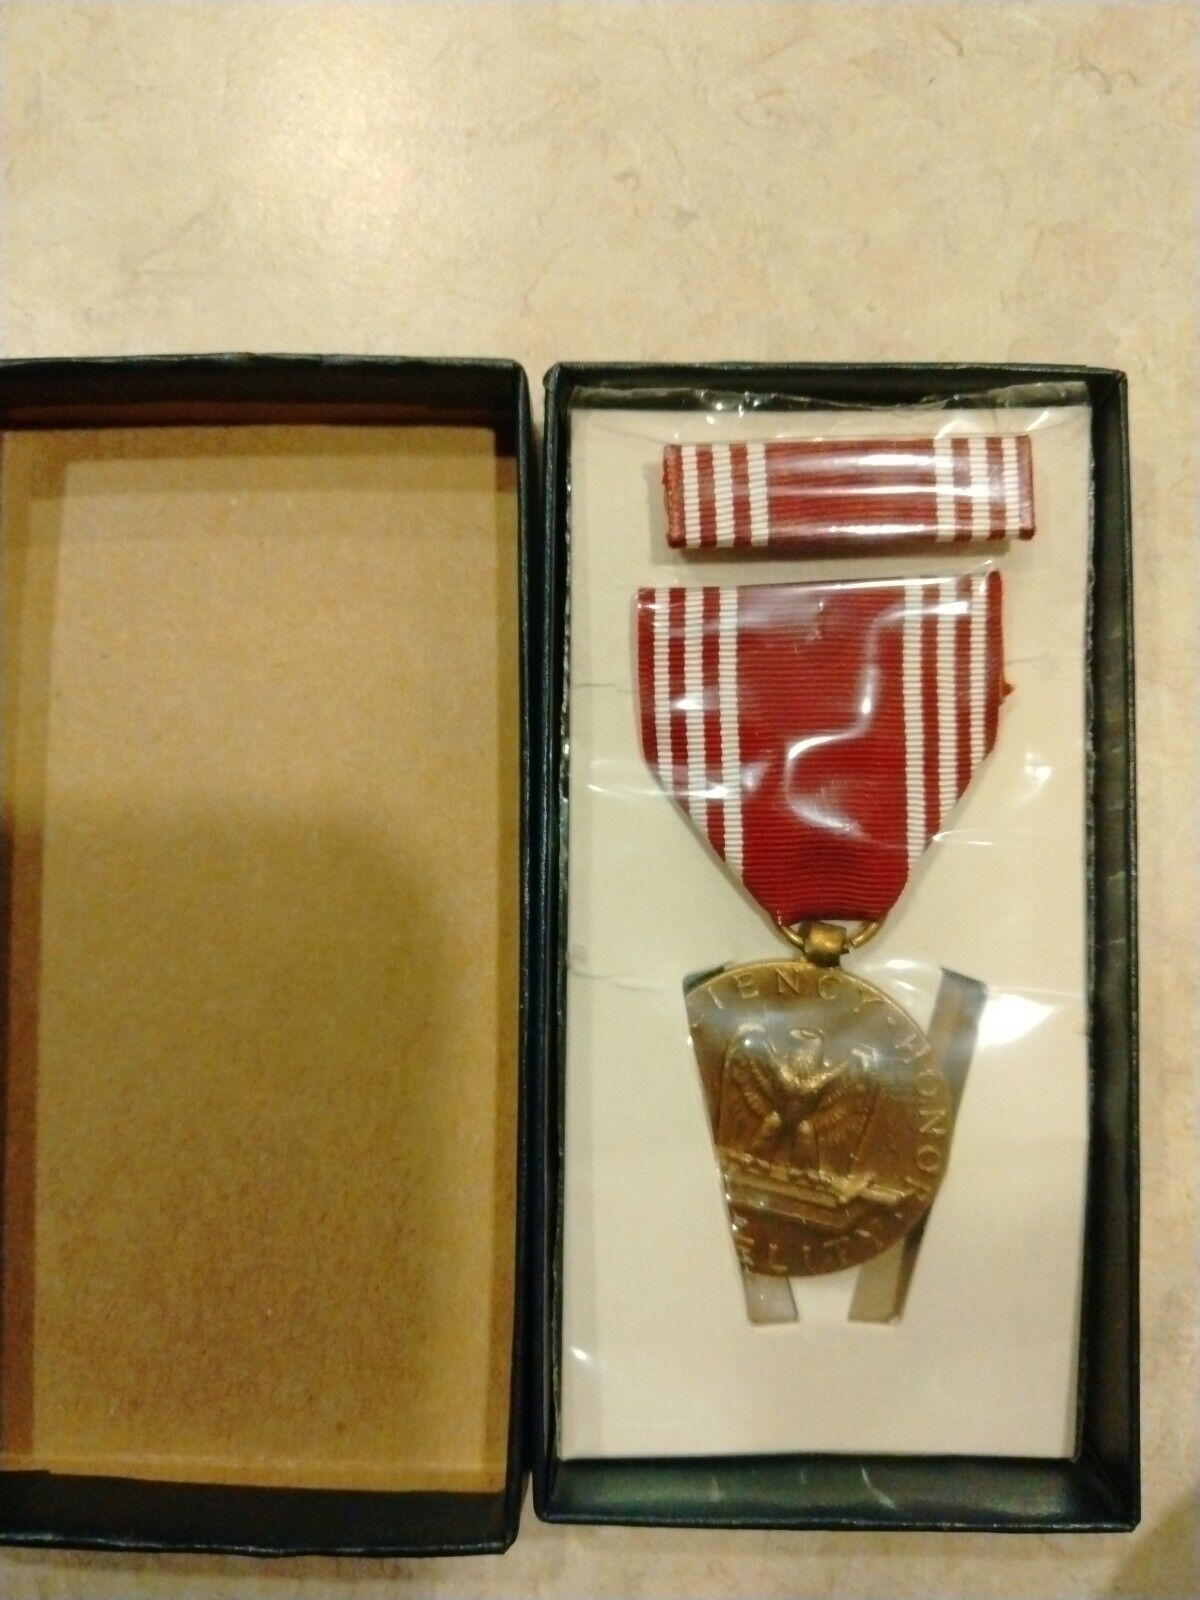 US ARMY GOOD CONDUCT MEDAL & RIBBON SET NEW UNOPENED